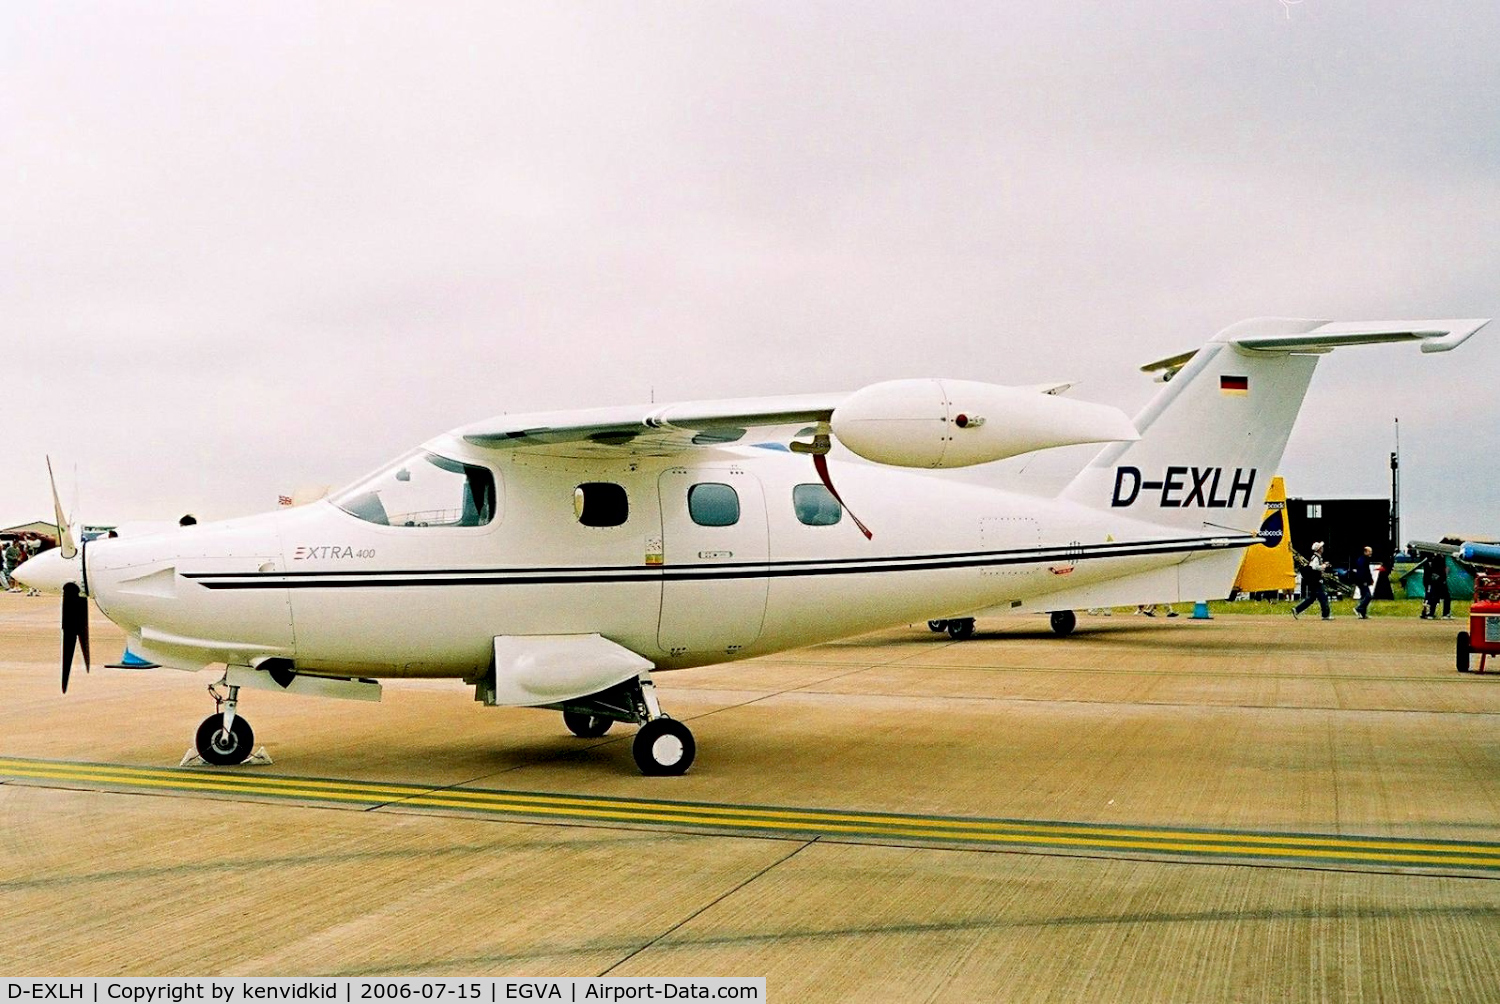 D-EXLH, 2000 Extra EA-400 C/N 06, Extra demonstrator on static display at RIAT.